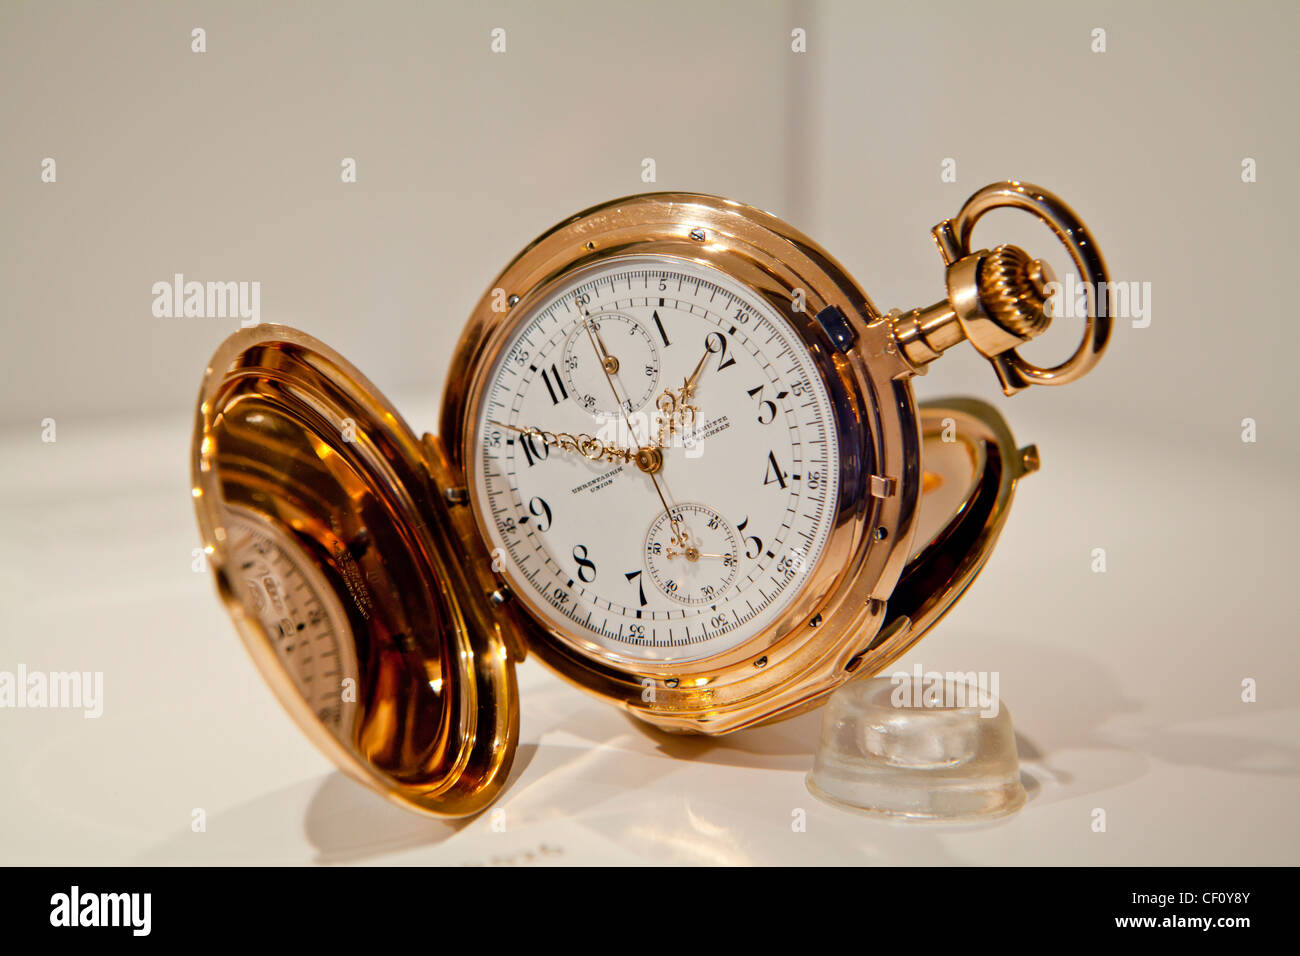 A valuable mechanical pocket watch made of gold. Stock Photo